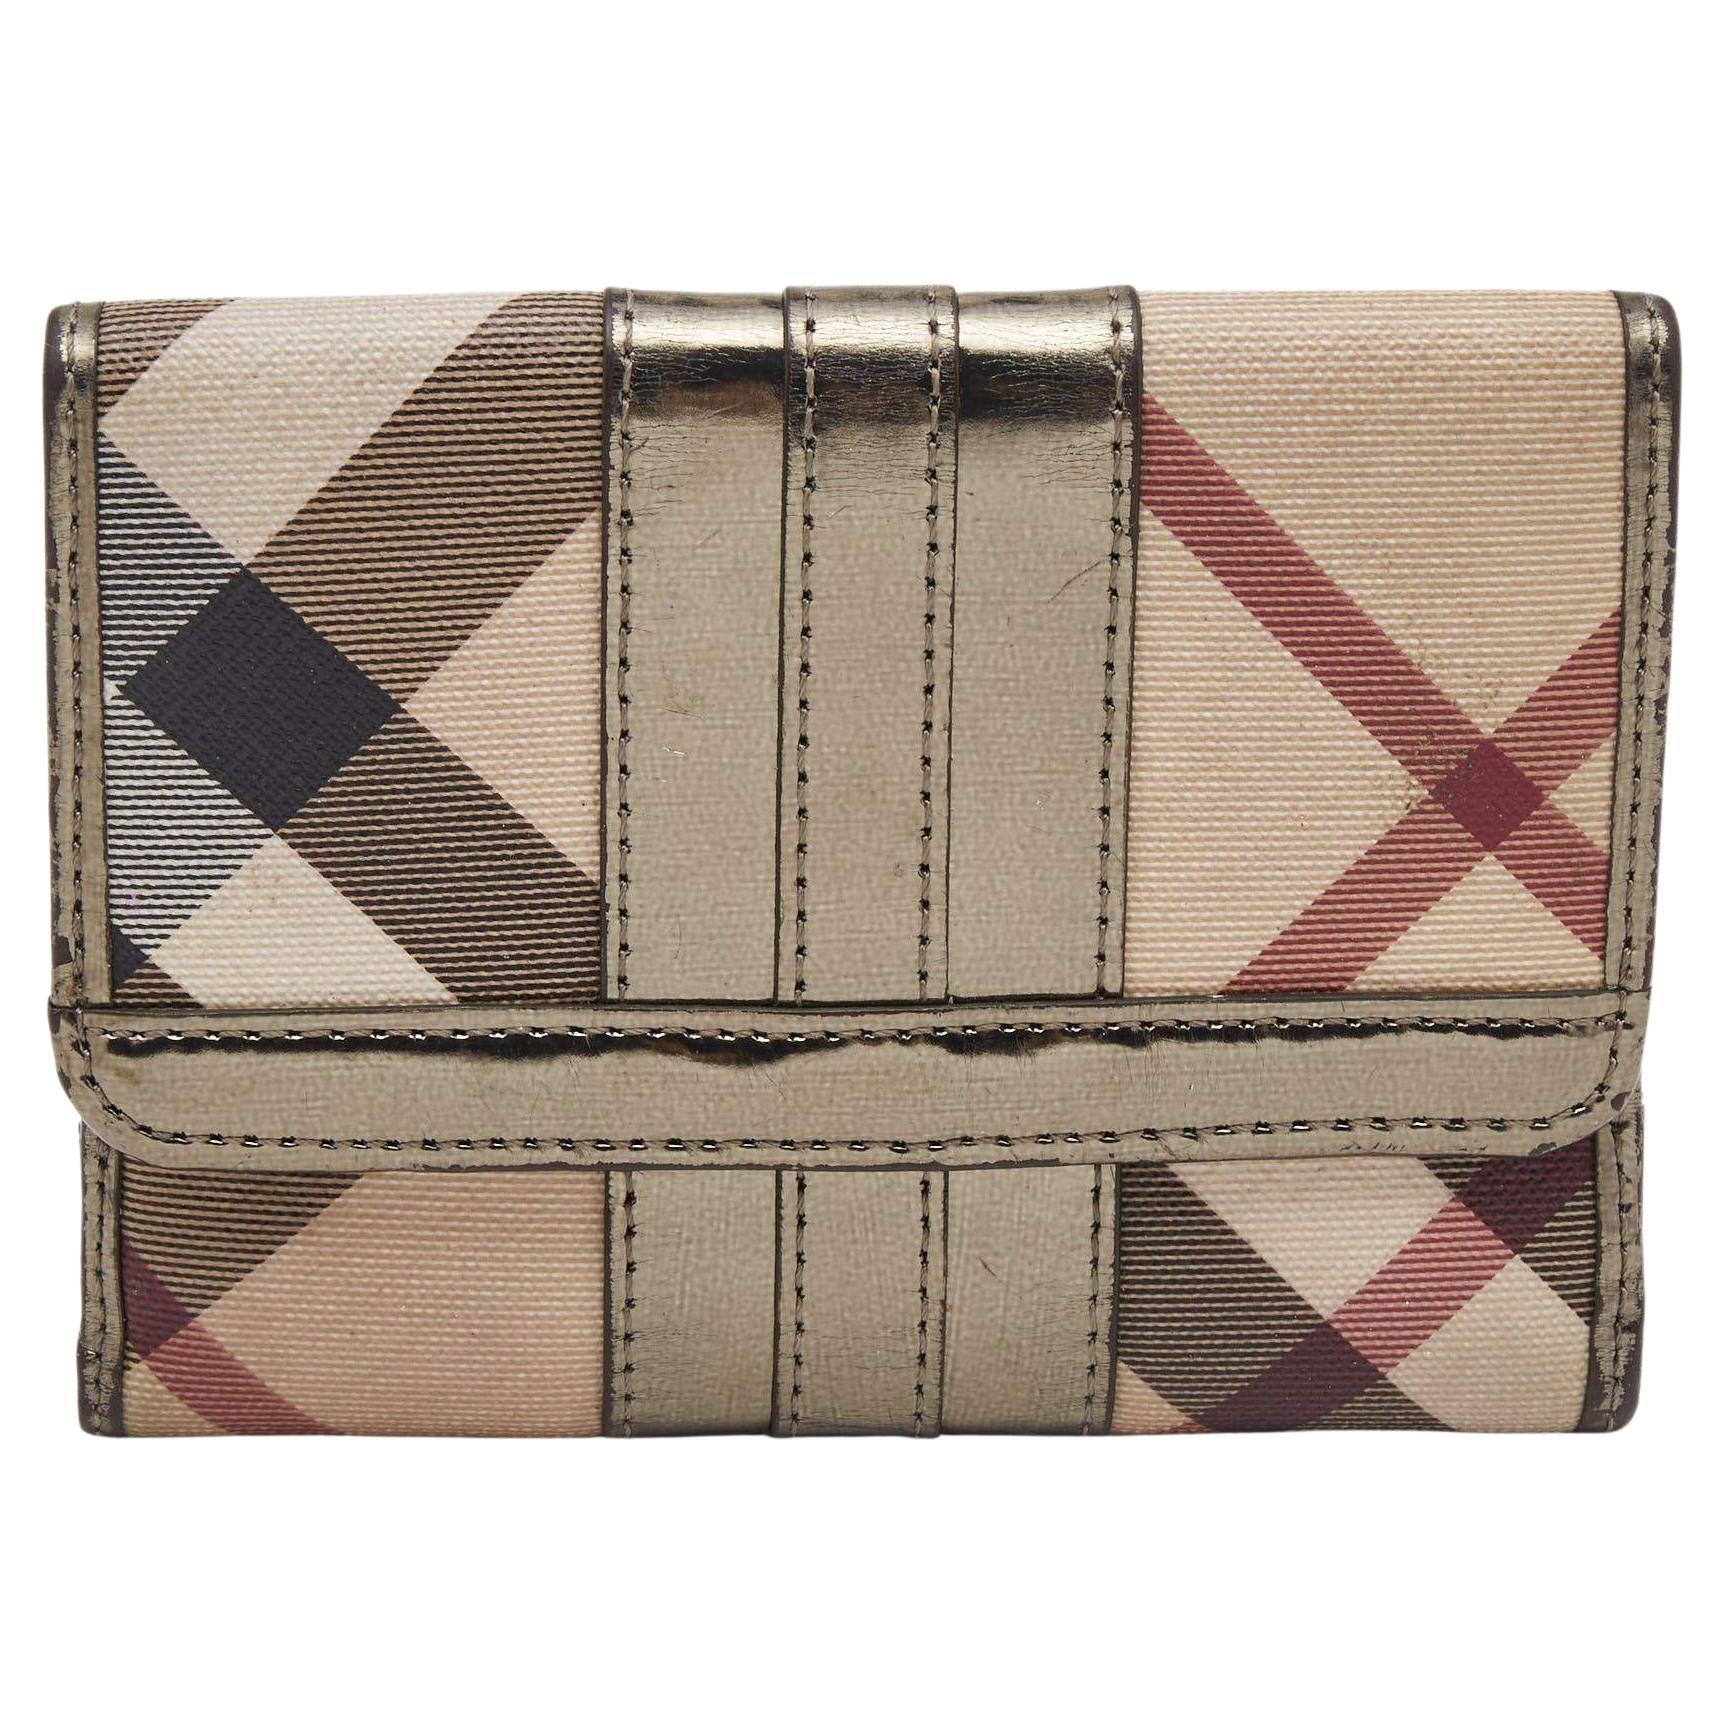 Burberry Metallic/Beige Nova Check PVC and Patent Leather French Wallet For Sale